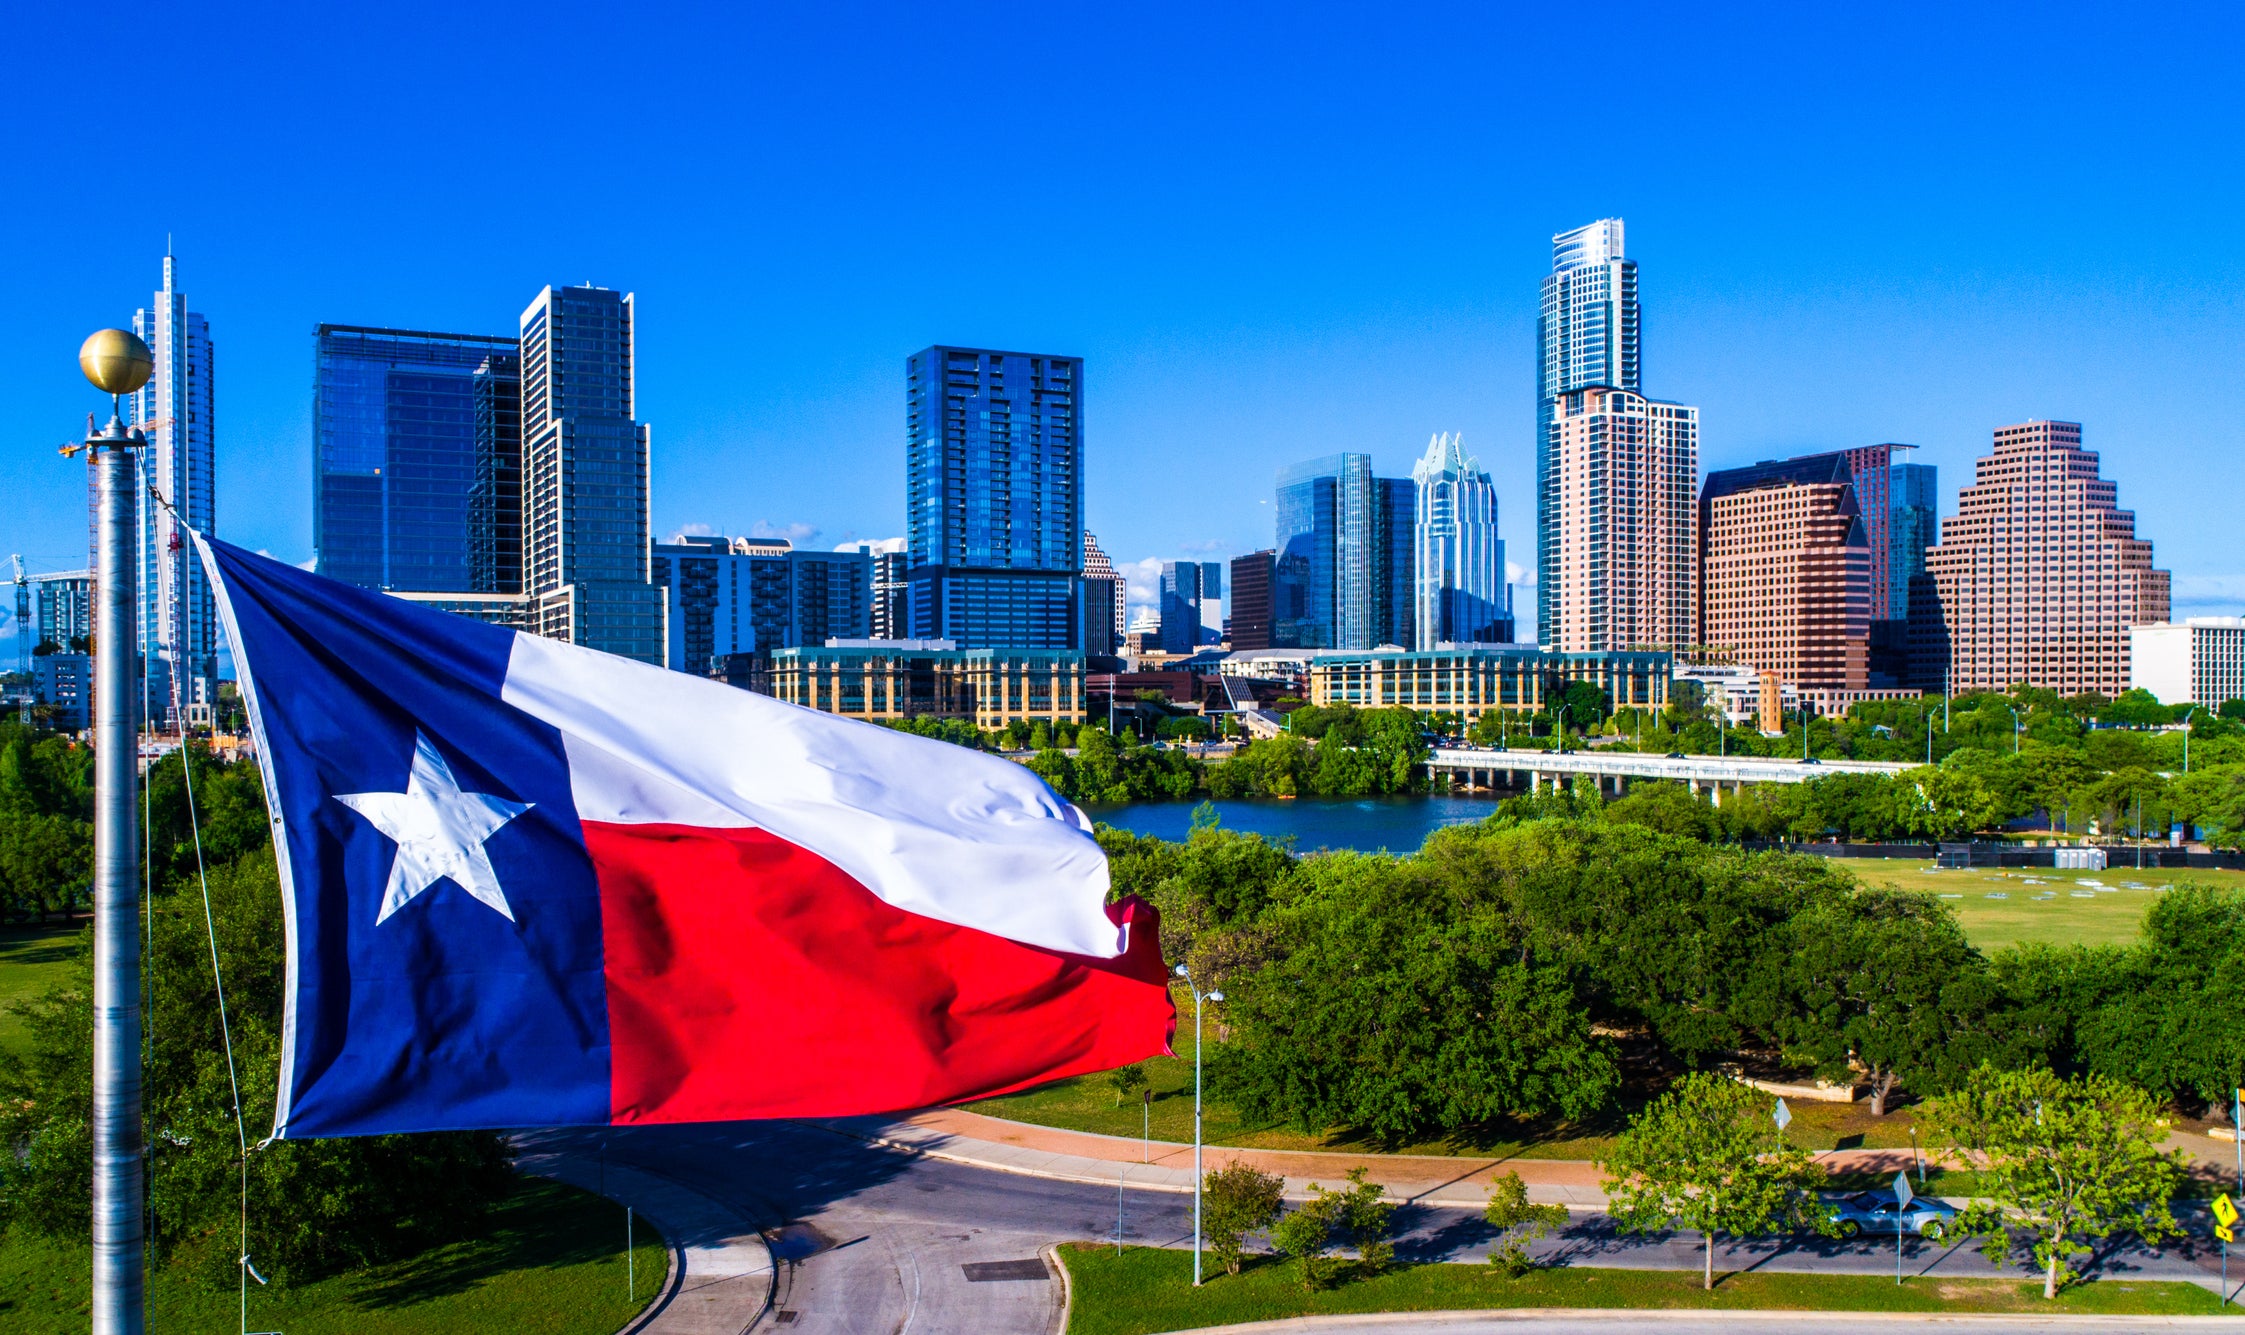 Austin, Texas, has seen an influx of tech workers since beginning of pandemic